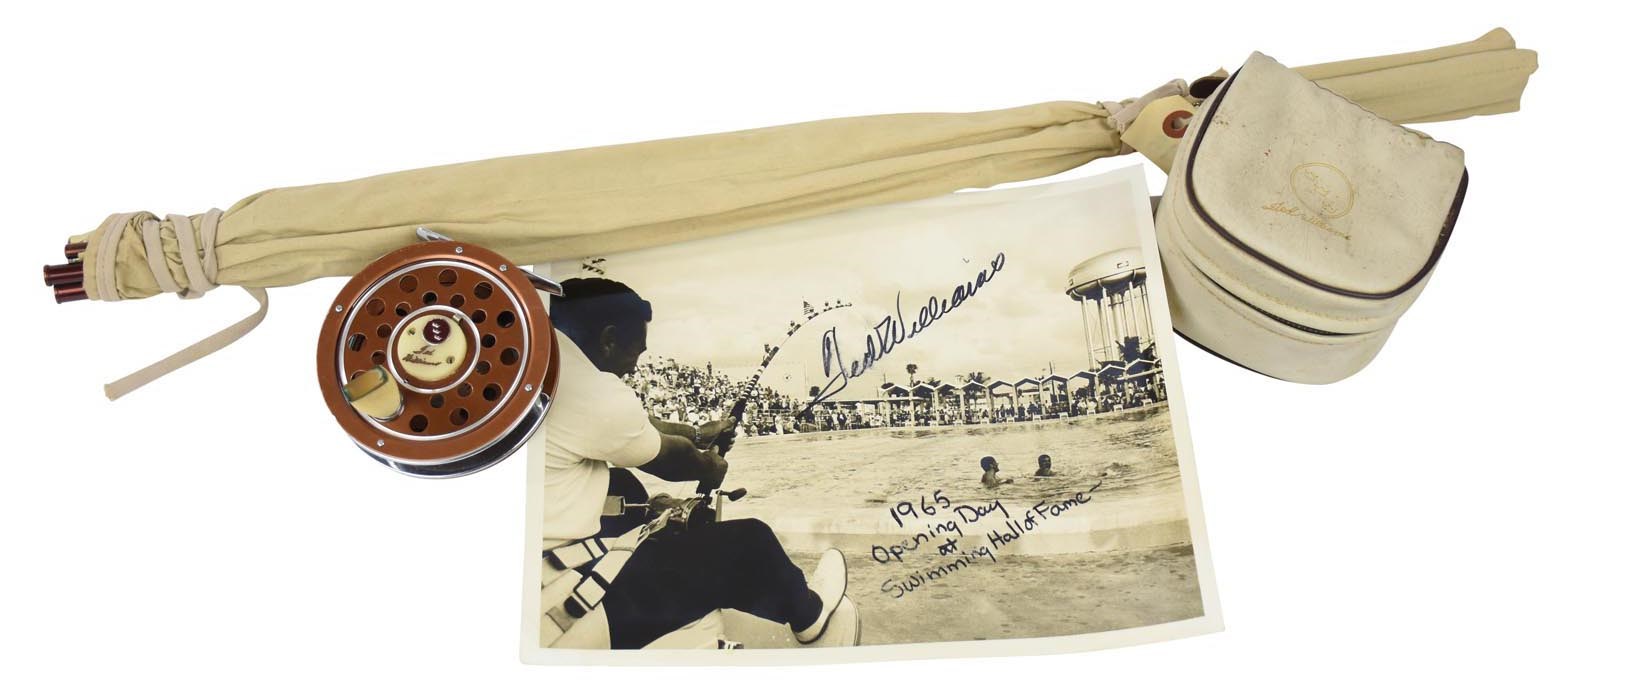 - Ted Williams Personally Used Fly Rod and Reel (ex-Ted Williams Museum)